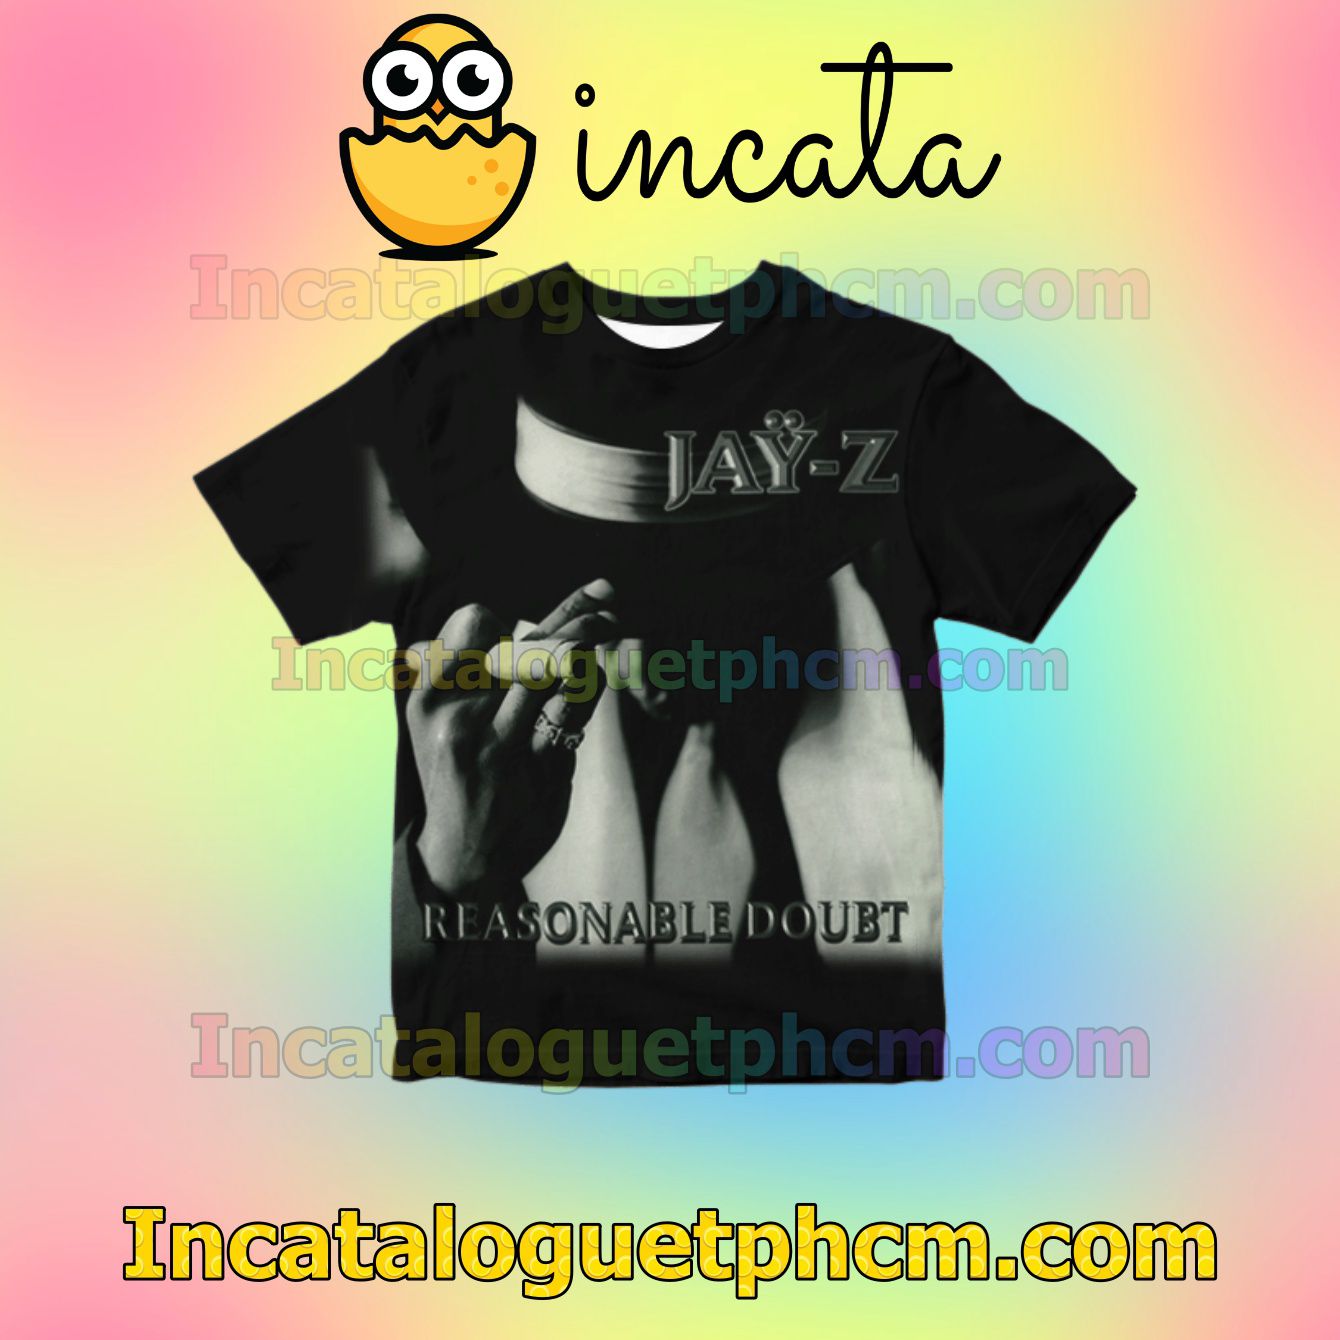 Jay-z Reasonable Doubt Album Cover Personalized Shirt